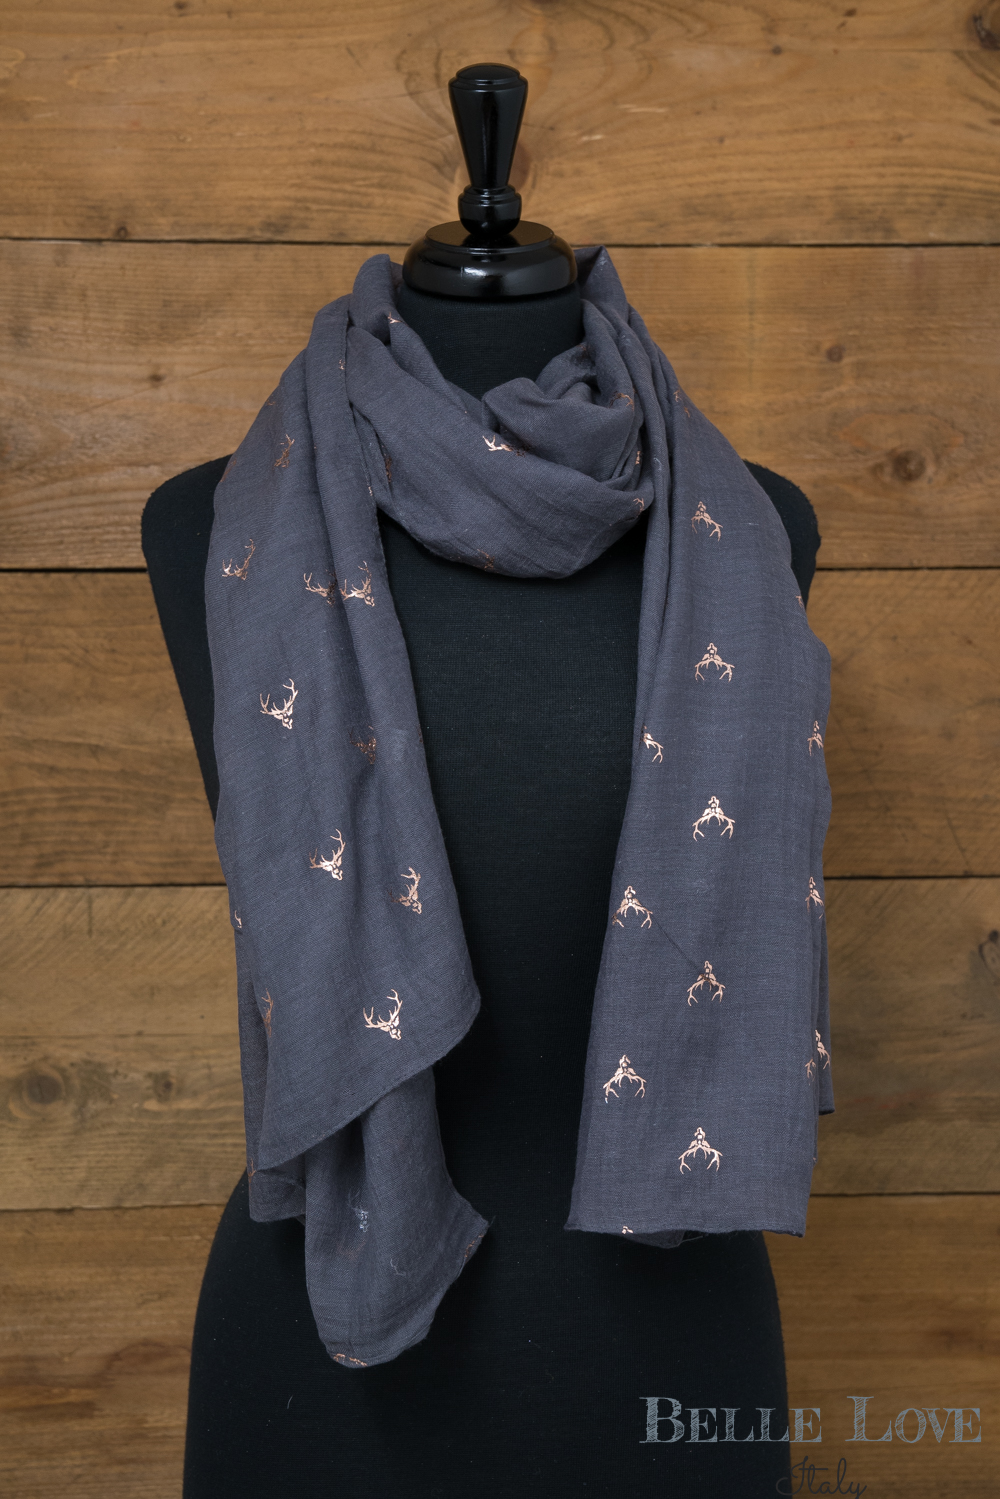 Belle Love Italy Rose gold Stags Scarf